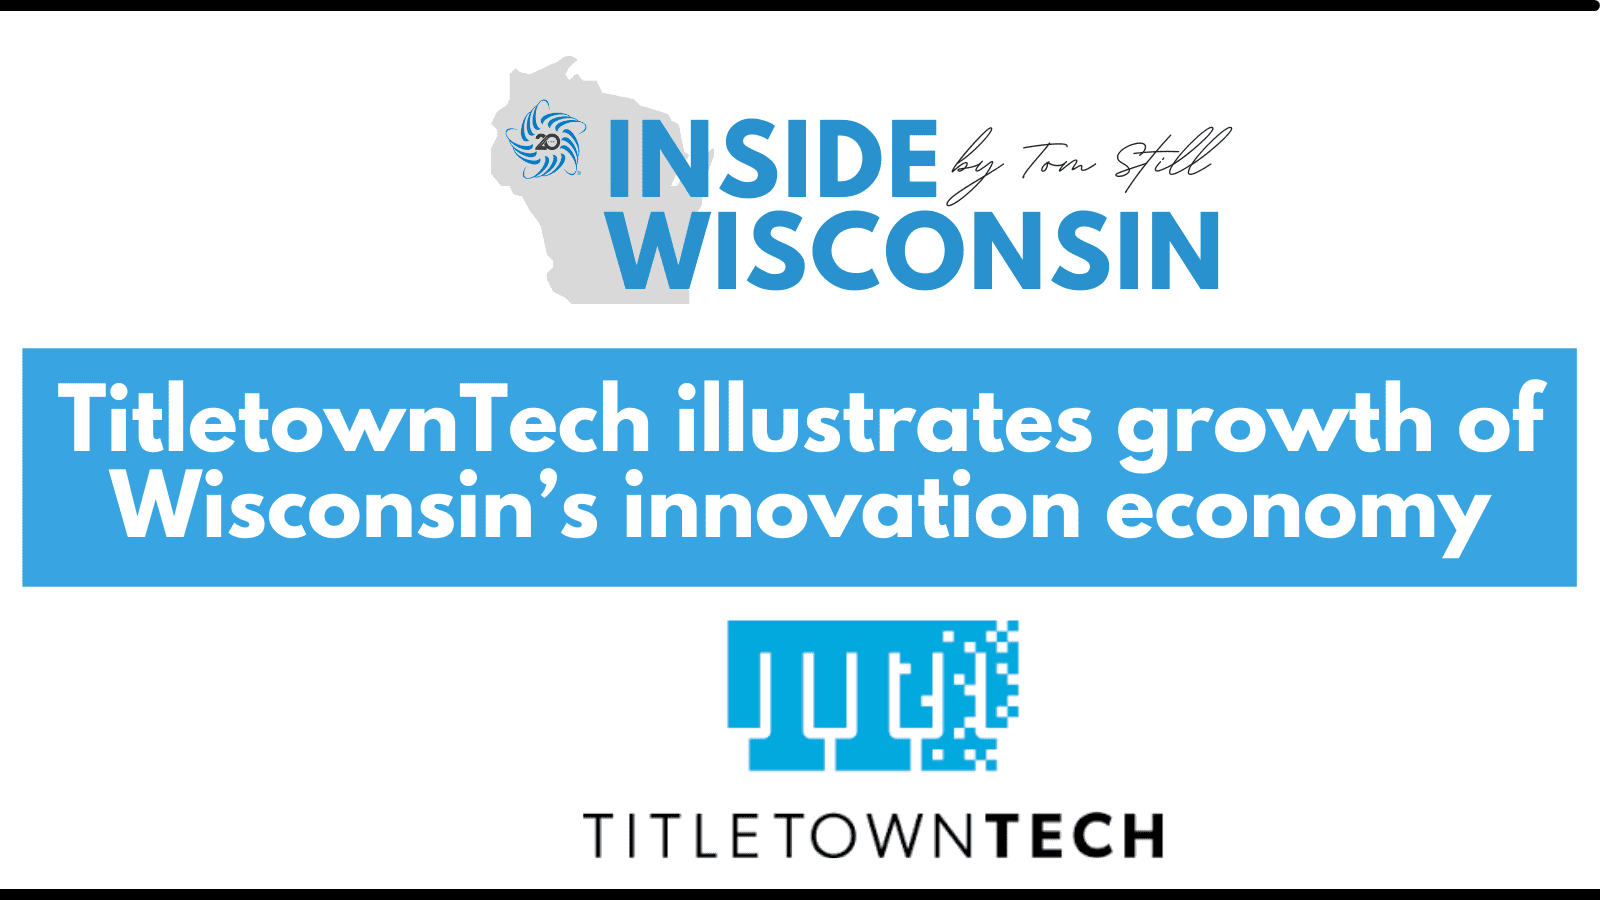 InsideWis: TitletownTech illustrates growth of Wisconsin’s innovation